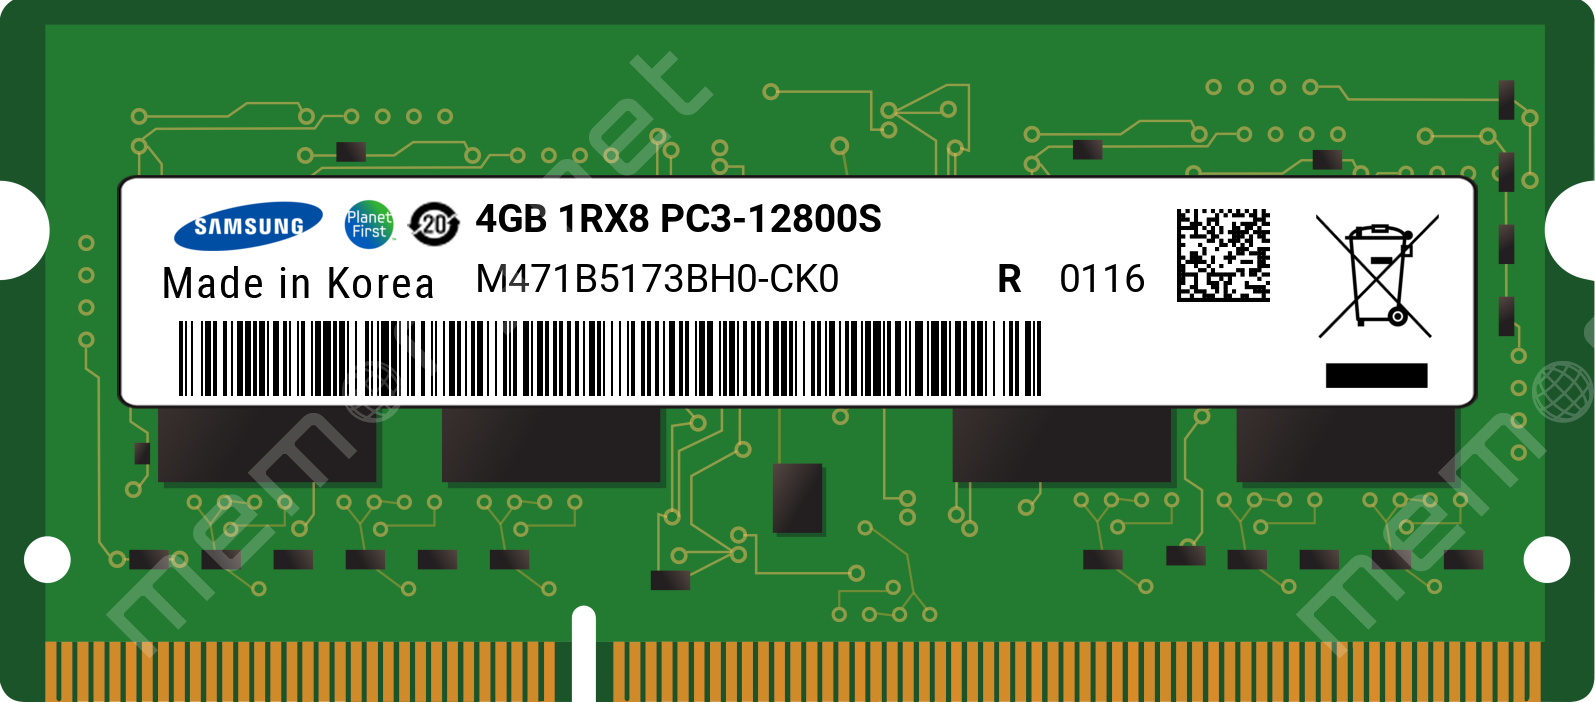 parts-quick 8GB DDR3 Memory for Toshiba Satellite P870-BT3G22 PC3-12800S 204 pin 1600MHz Laptop SODIMM Compatible RAM